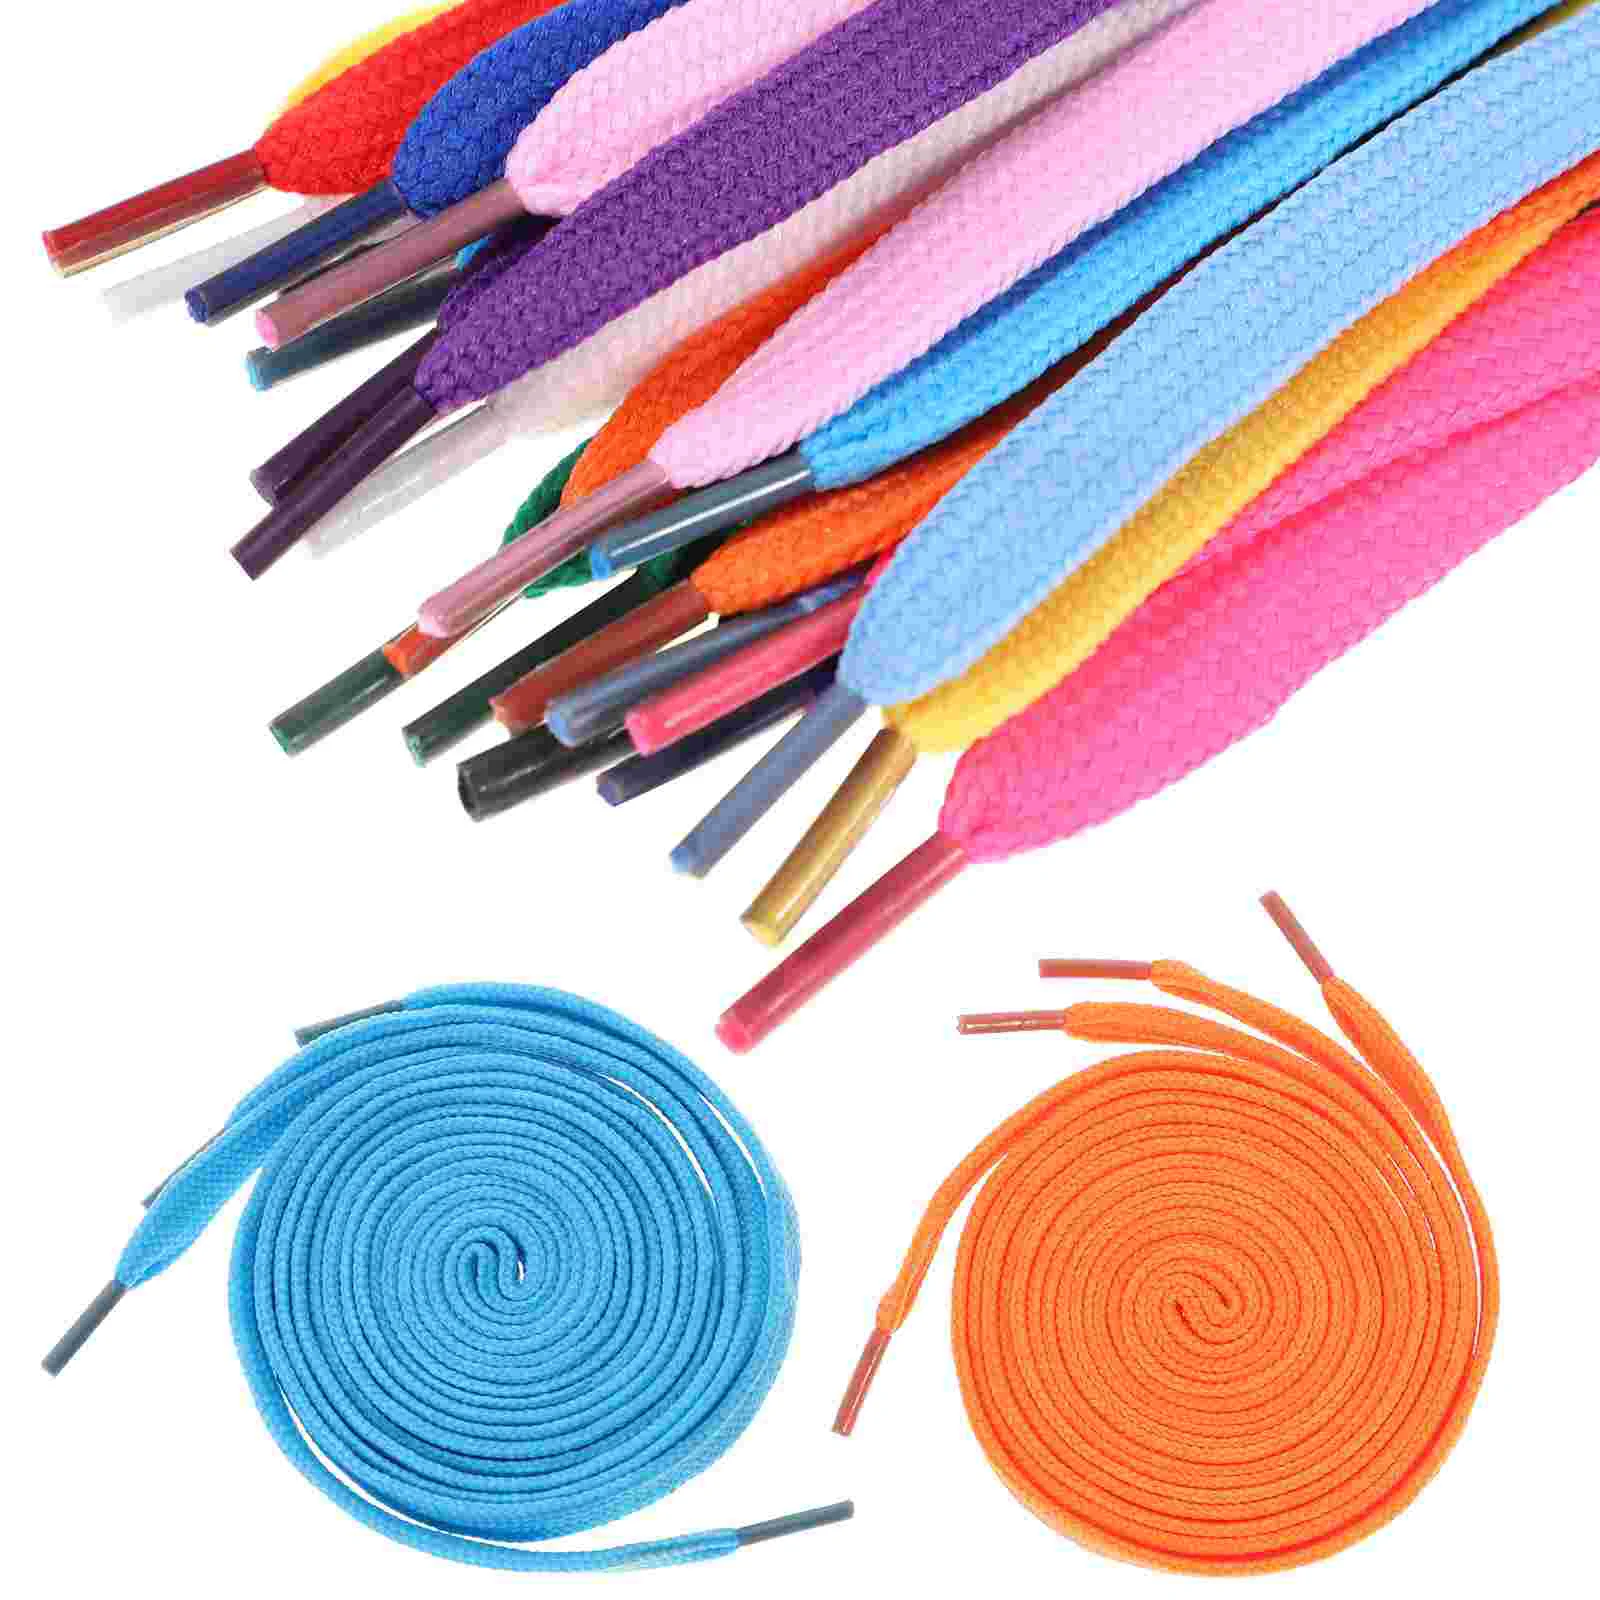 of Replacement Flat Shoelaces Shoe Laces Strings for Sports Shoes /Boots /Sneakers /Skates (Assorted Colors) gradient flat shoe laces without ties elastic shoelaces for sneakers elderly and children convenient lazy shoes lace accesories